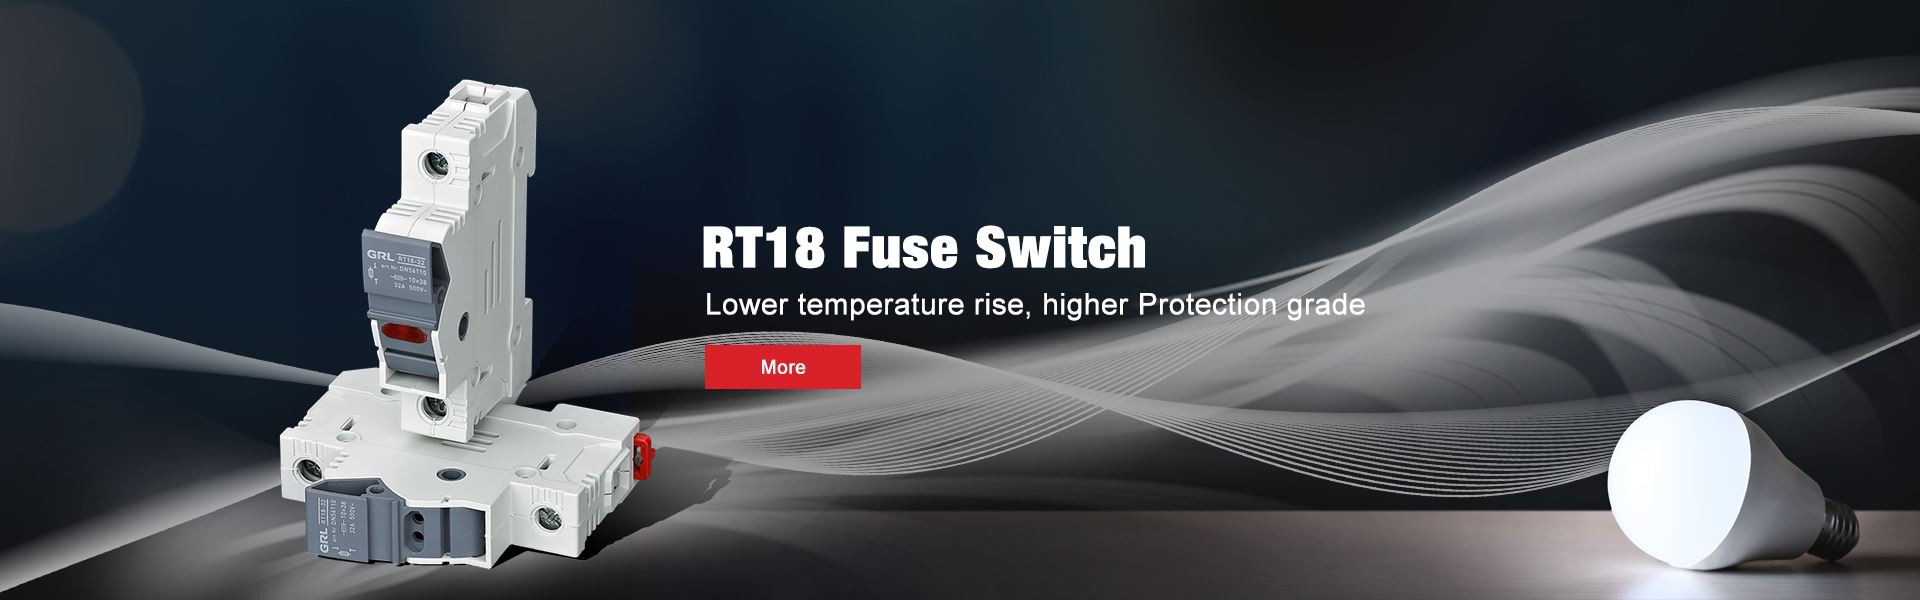 RT18 Fuse Switch